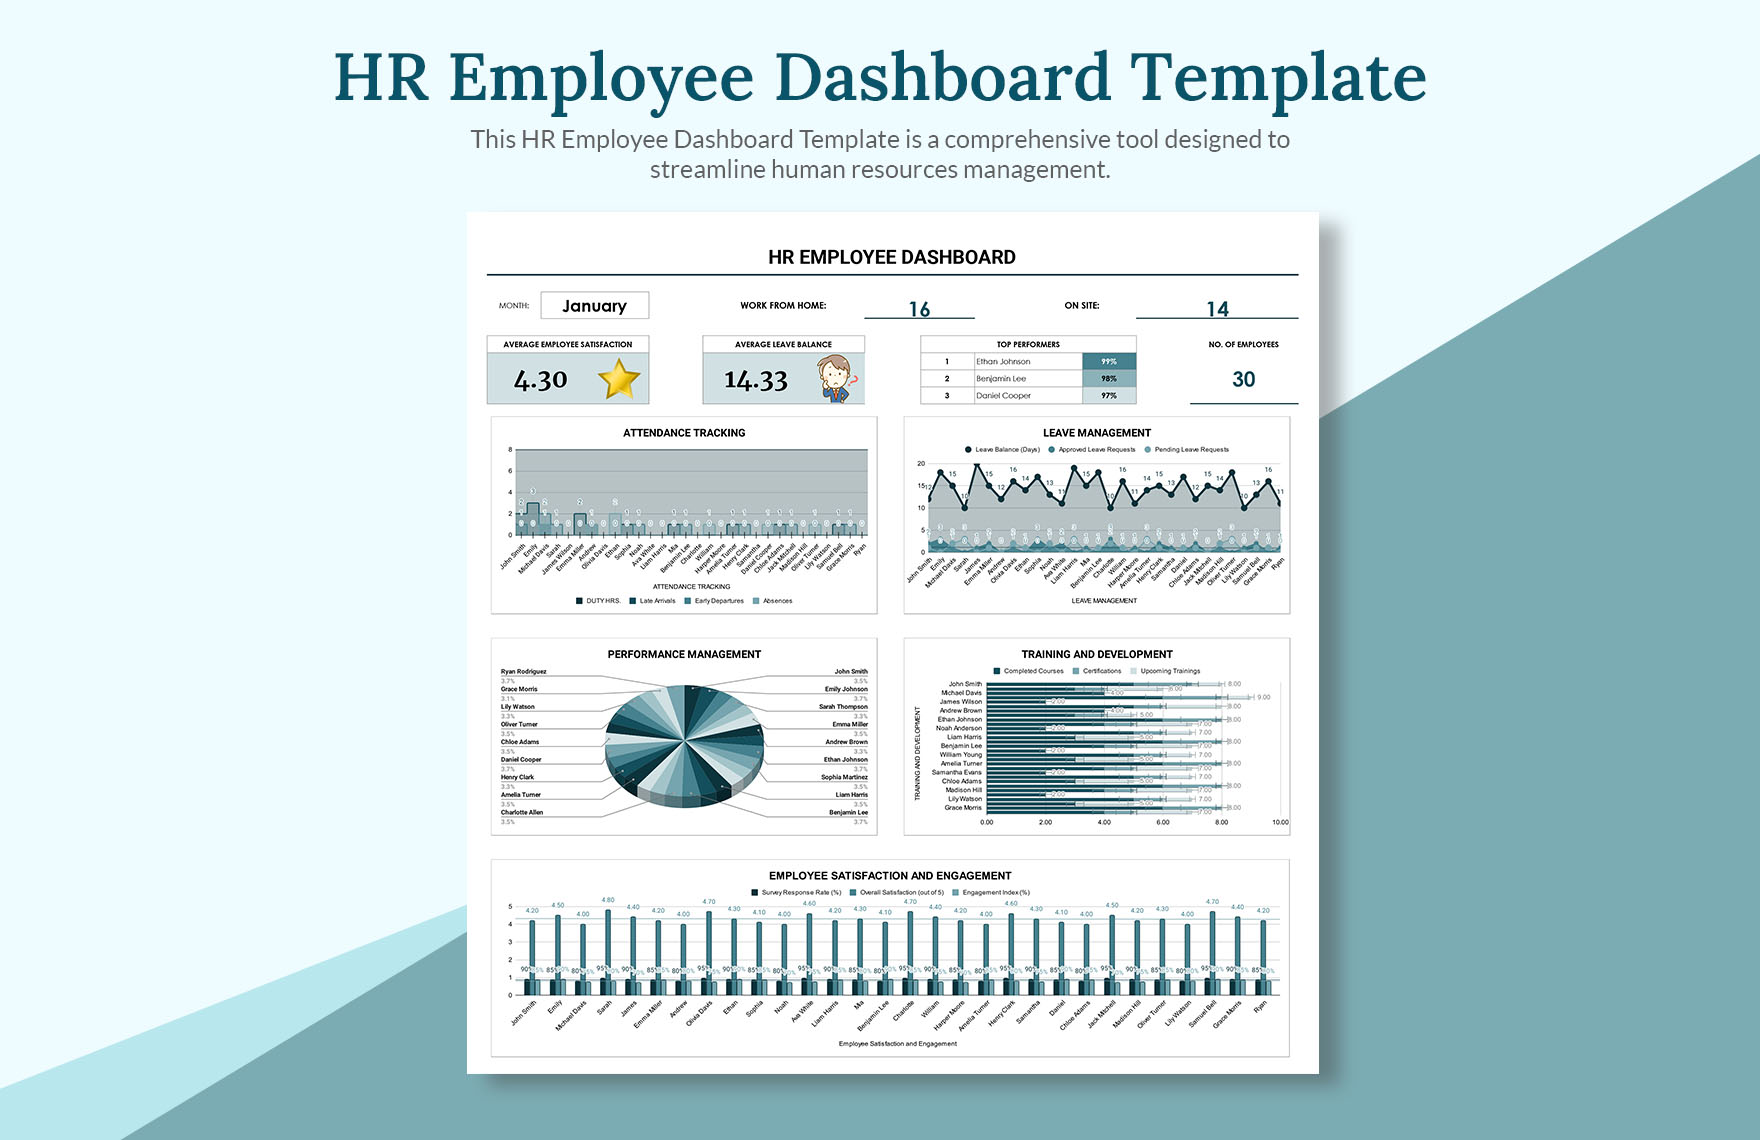 HR Employee Dashboard Template - Download in Excel, Google Sheets ...